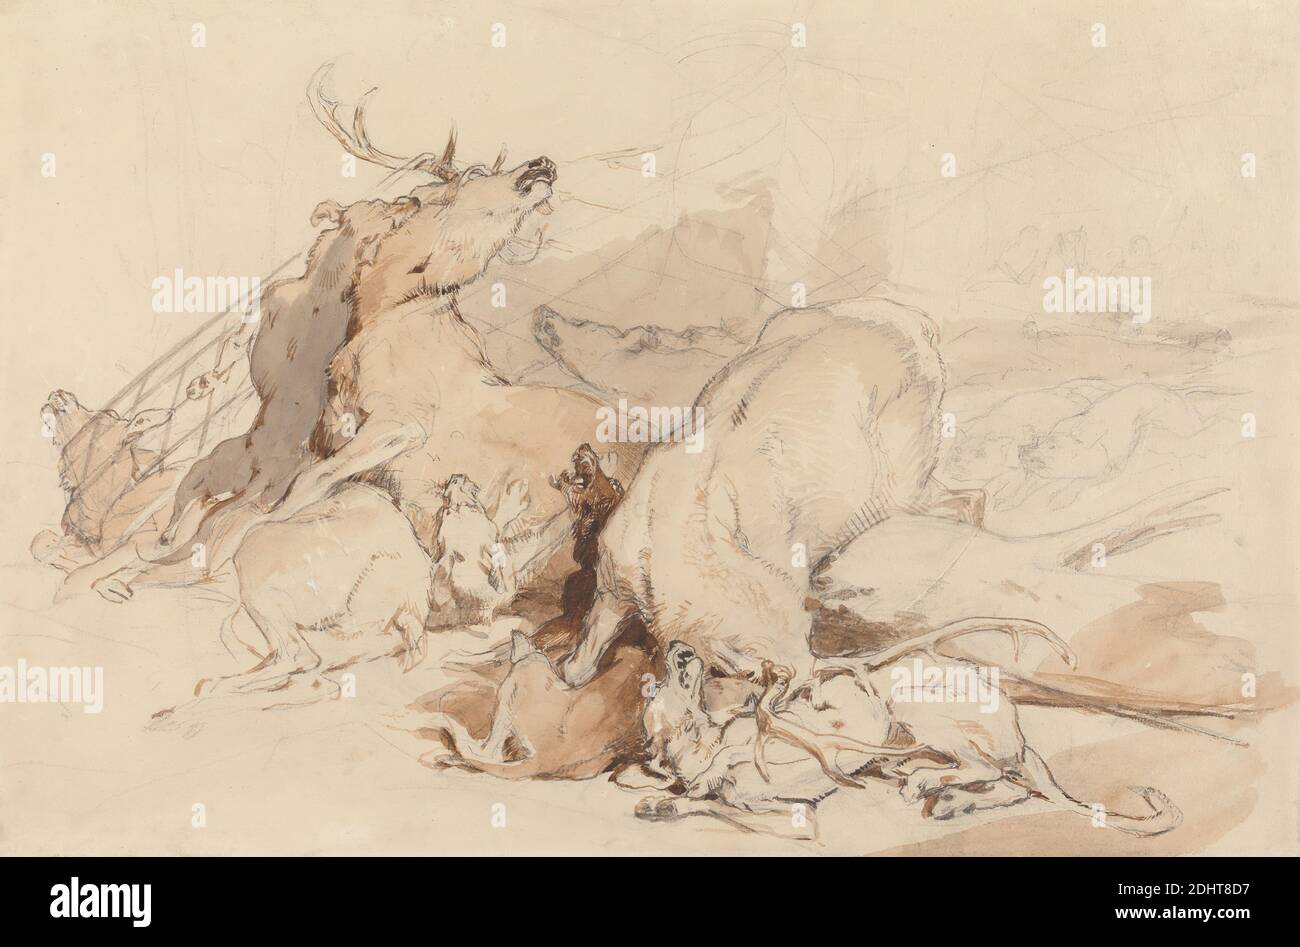 Hounds and Hunters Attacking Deer, Sir Edwin Henry Landseer, 1802–1873, British, 1831, Brown and gray wash with graphite on medium, slightly textured, cream wove paper, Sheet: 11 3/8 x 17 1/8 inches (28.9 x 43.5 cm), animal art, animals, attack, deer, dogs (animals), hounds (dogs Stock Photo